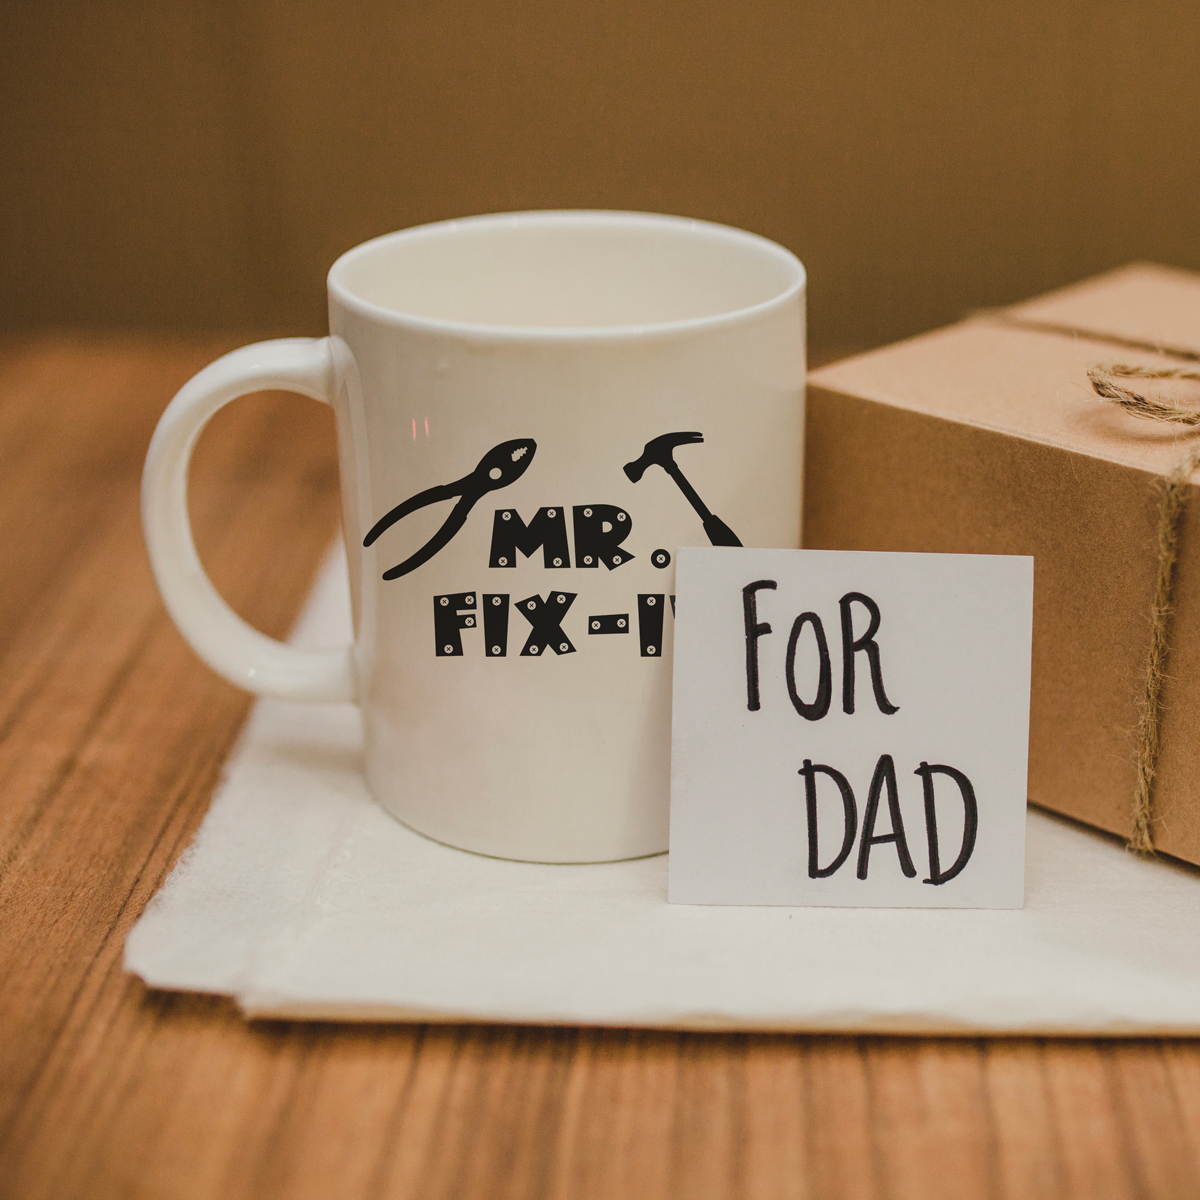 This image shows a mug that says Mr. Fix-It (although the it is covered up). In front of the mug is a small card that says for Dad.